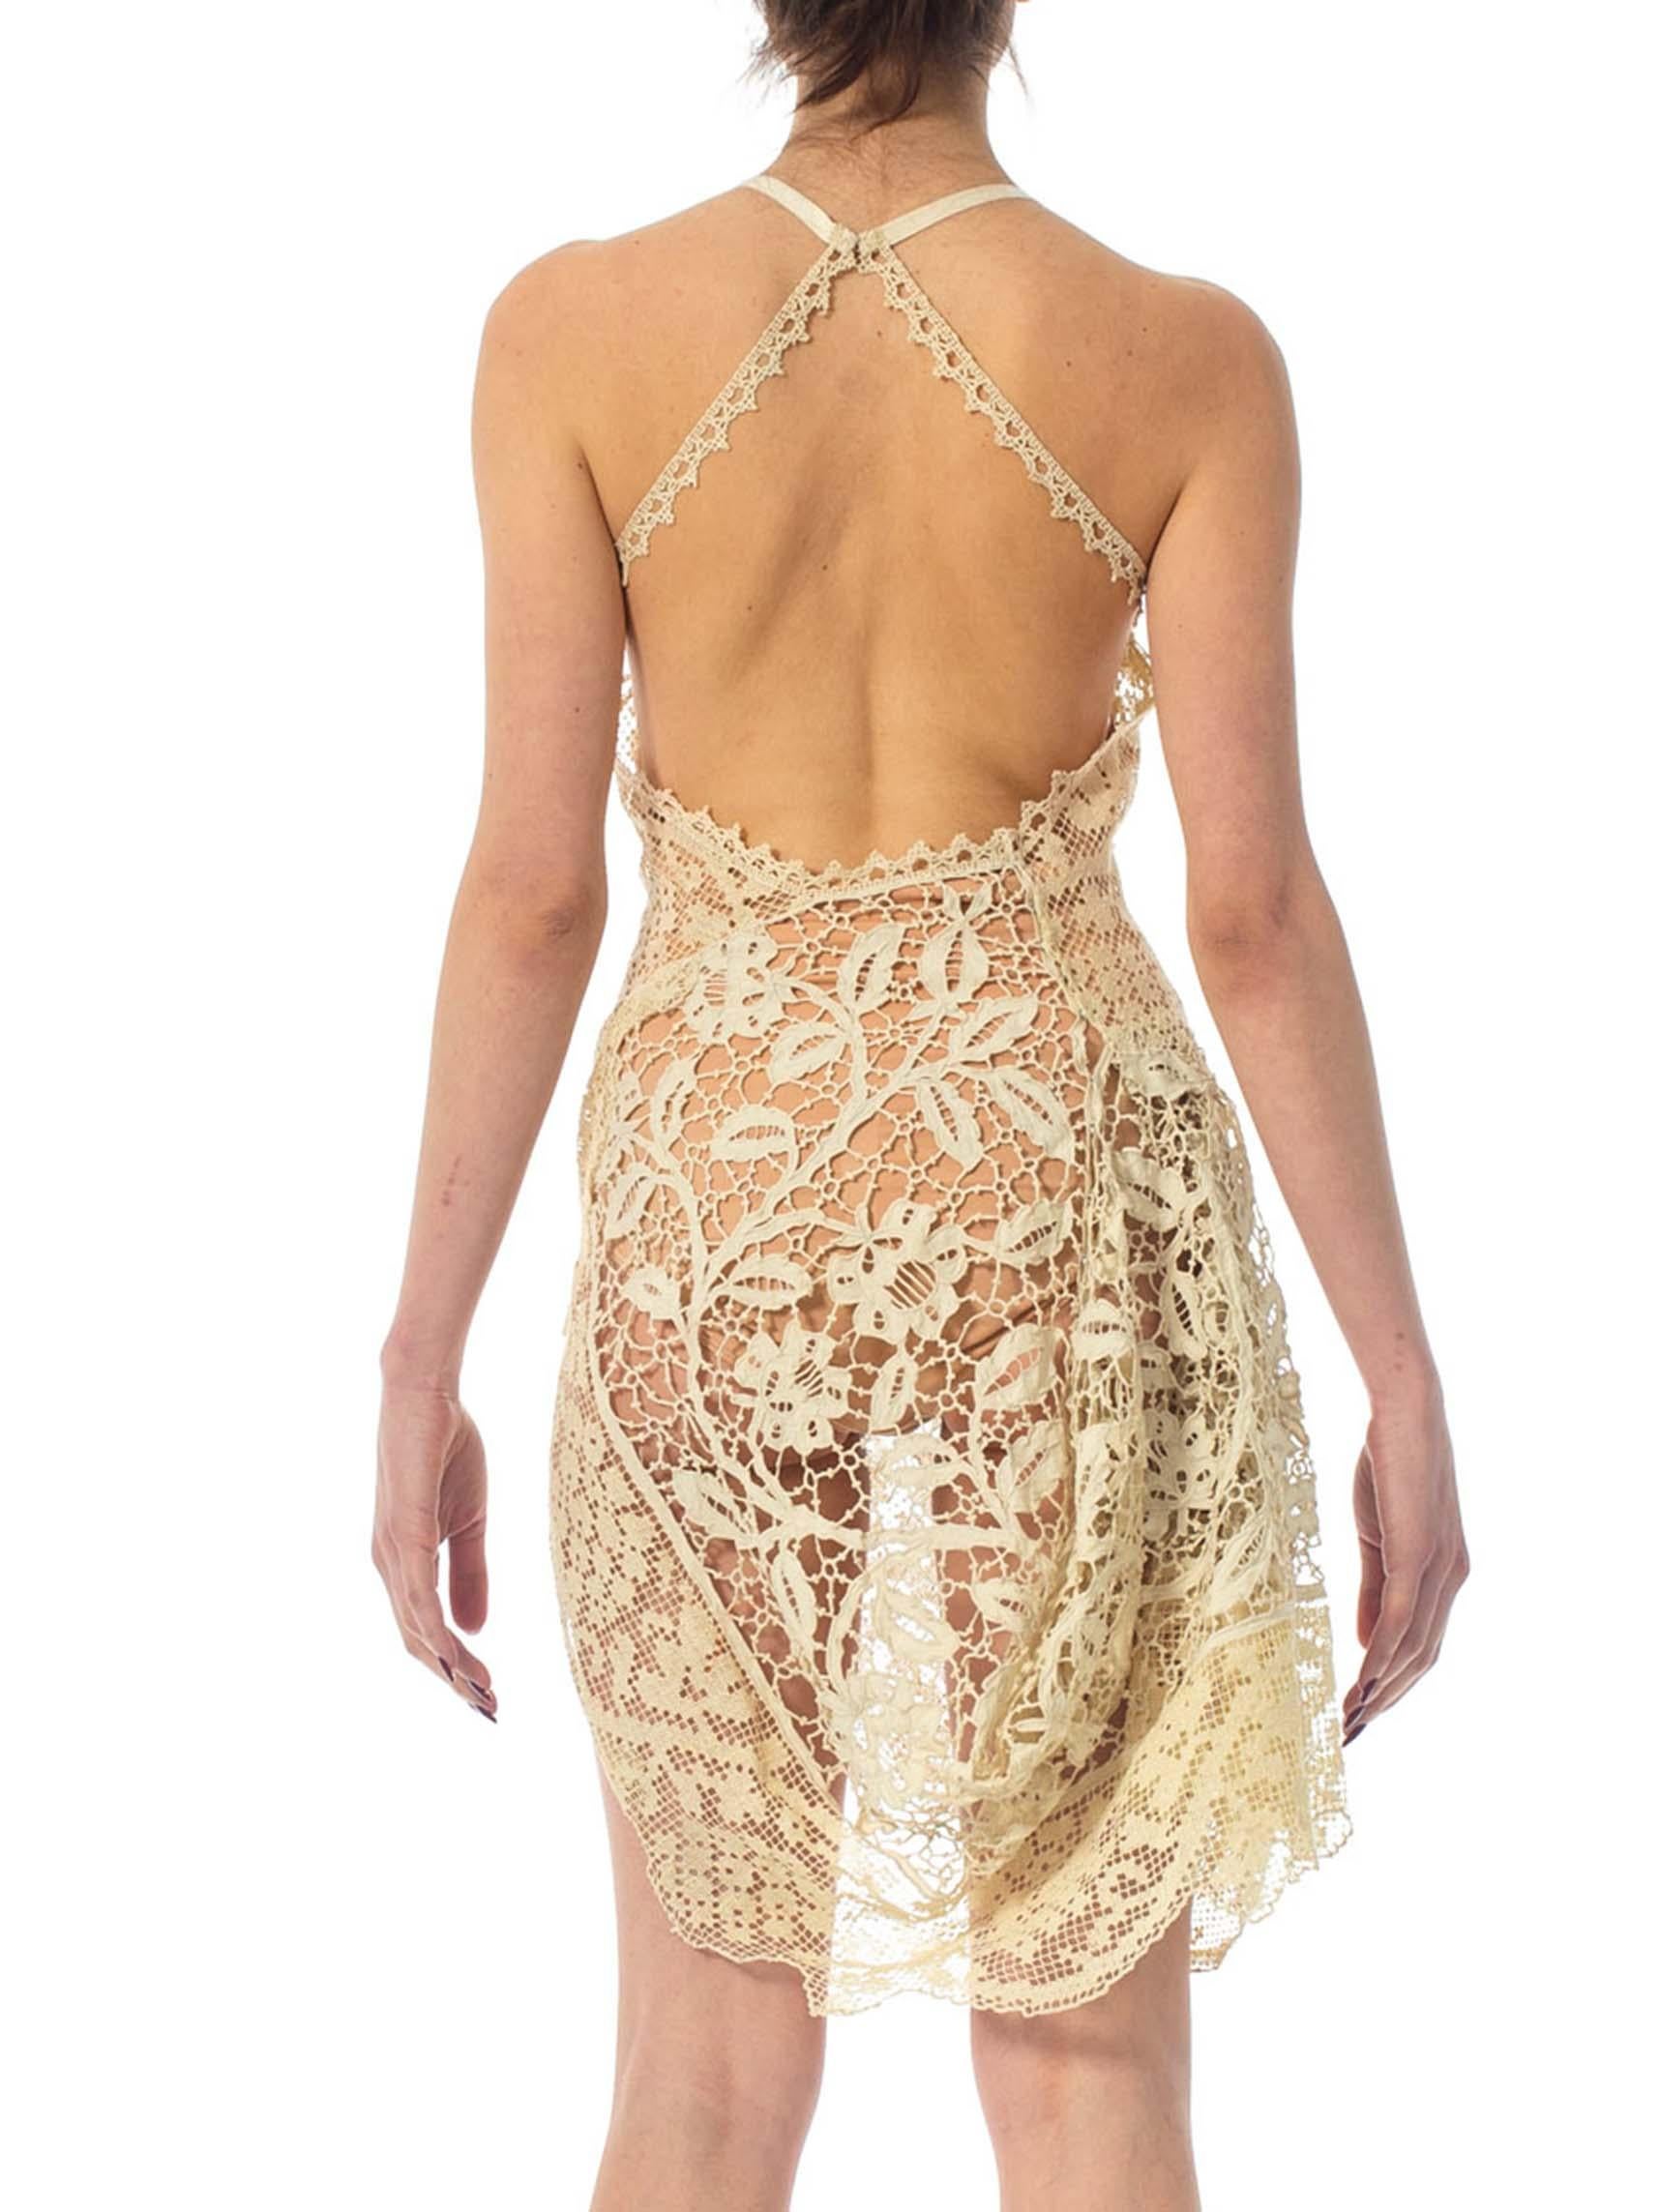 MORPHEW COLLECTION Creme Dress Made From 100 Year Old Handmade Lace In Excellent Condition For Sale In New York, NY